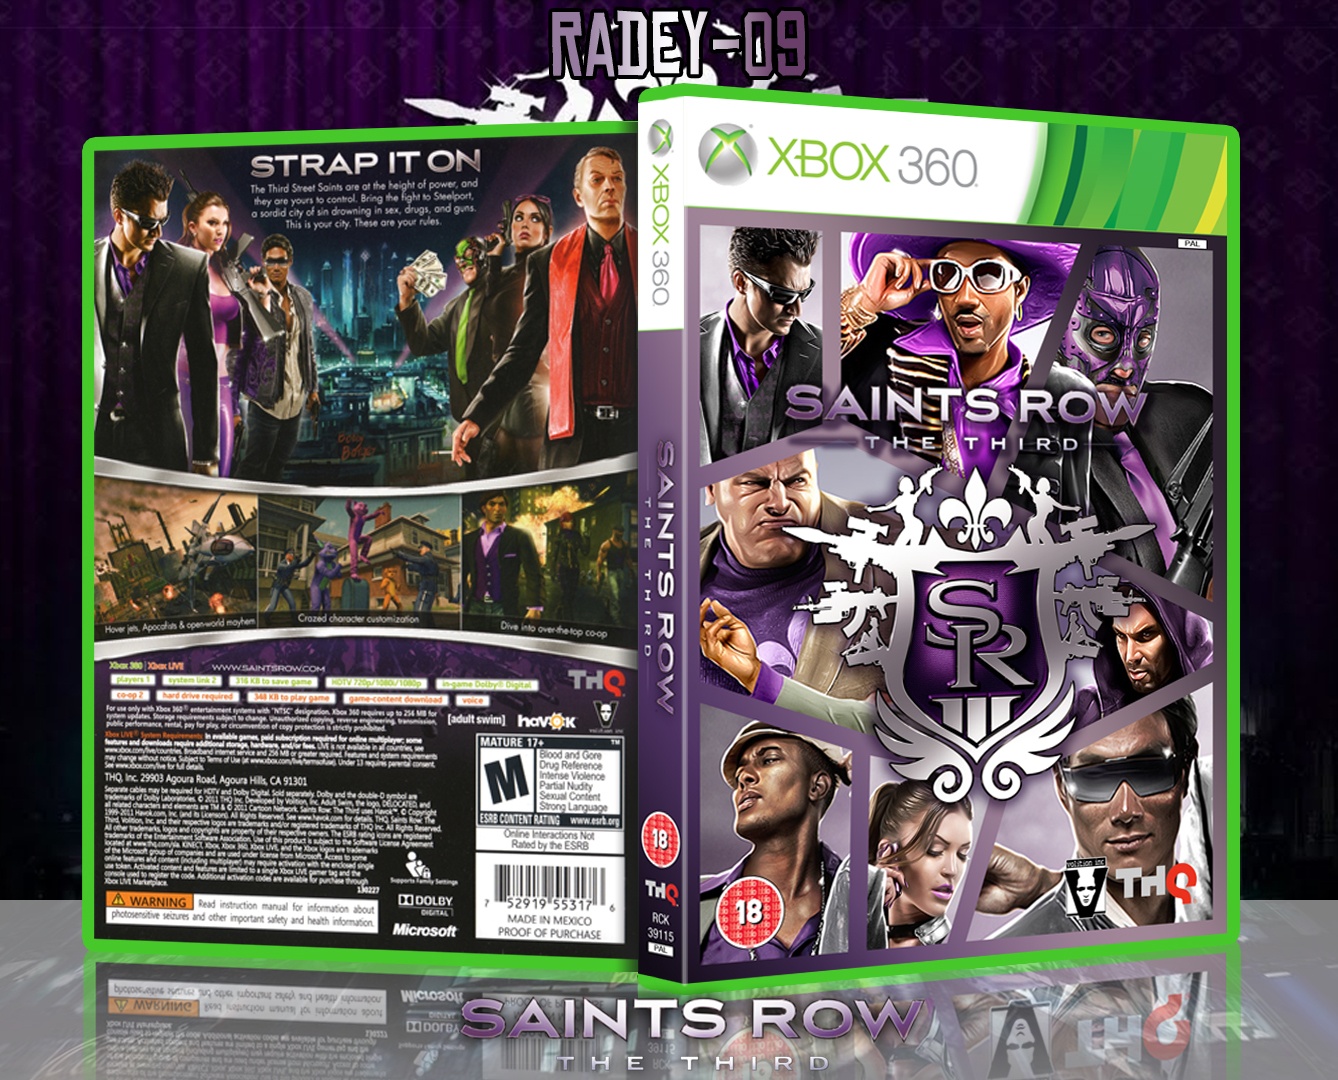 Viewing full size Saints Row: The Third box cover.